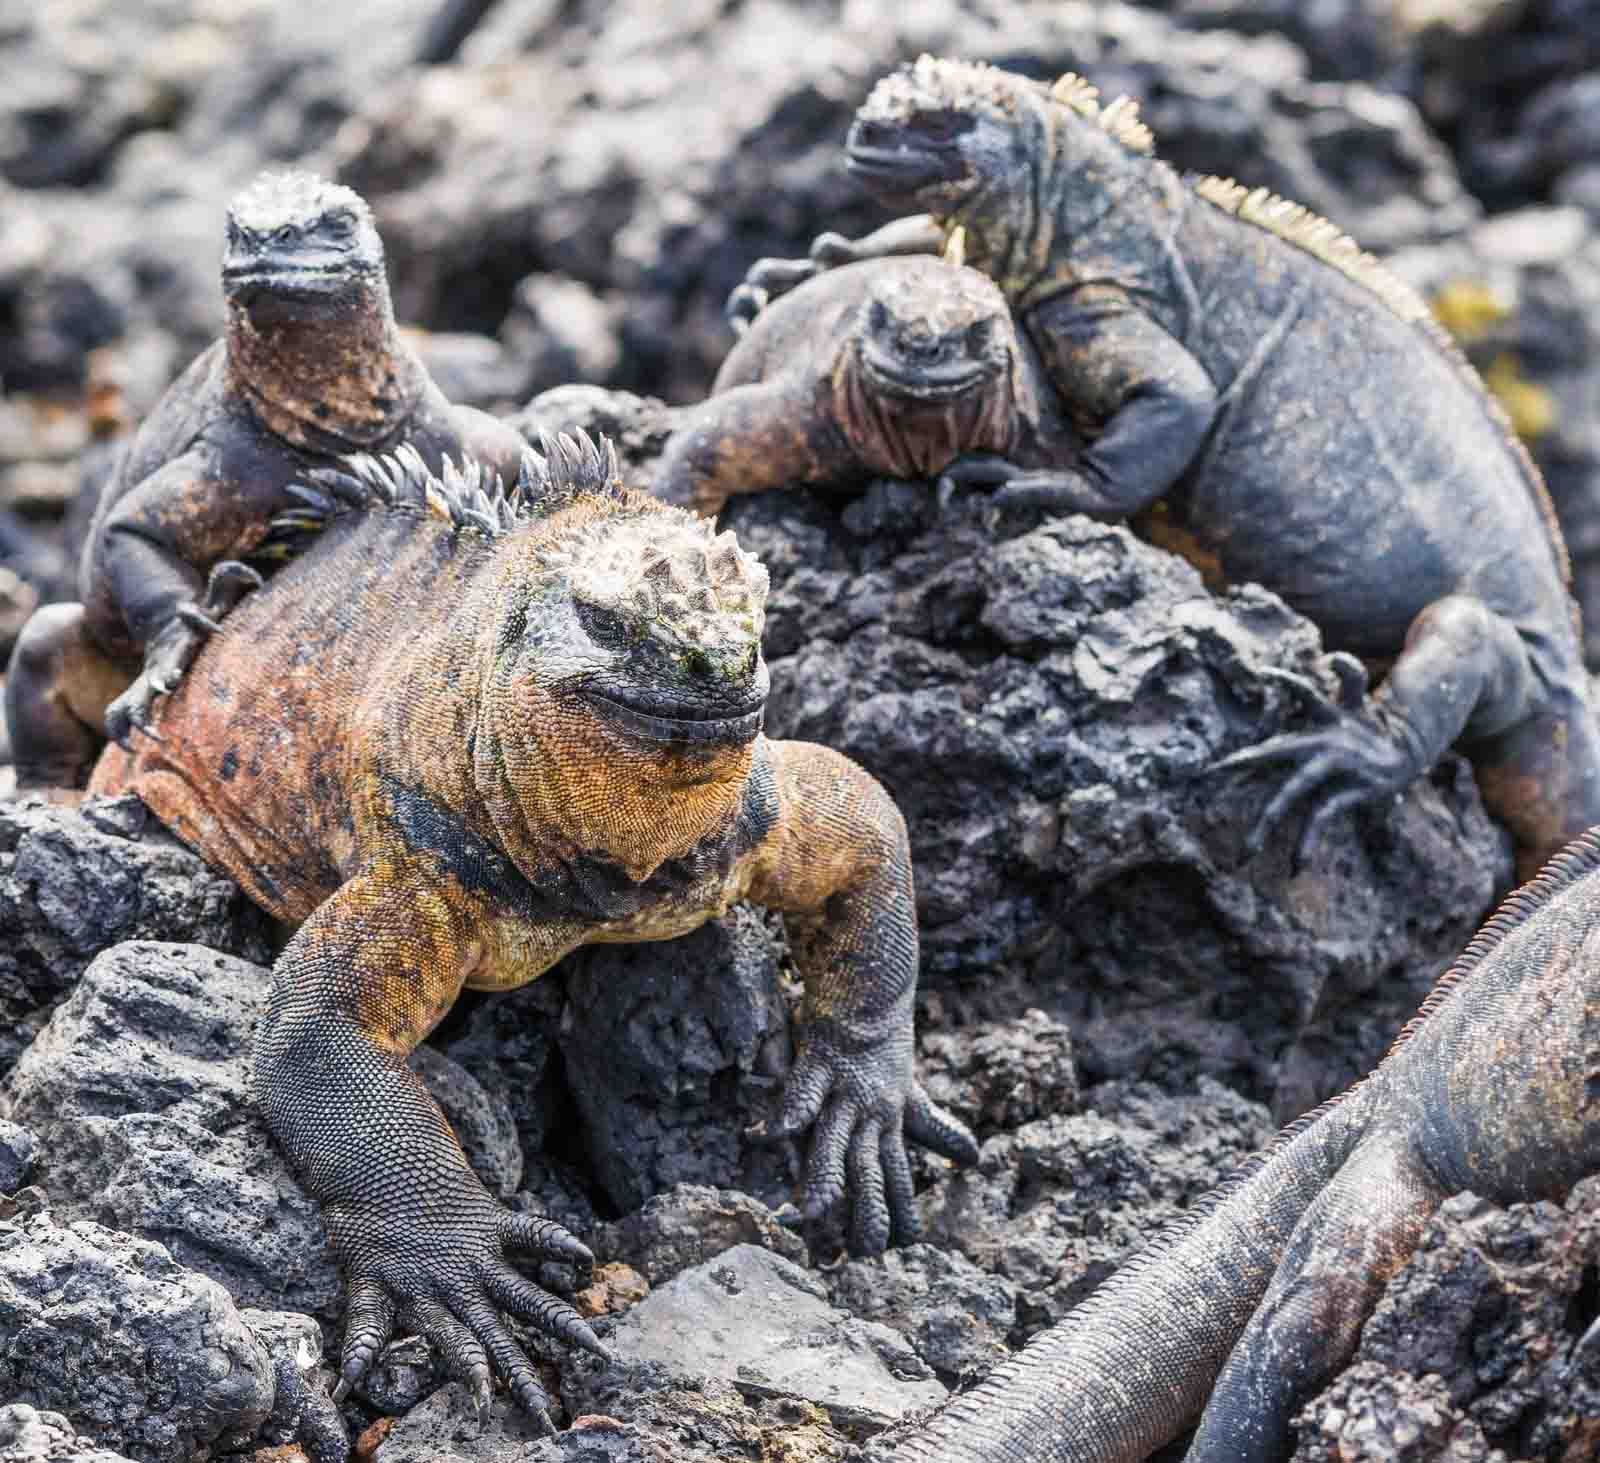 How can we use technology to save the Galapagos marine iguana?